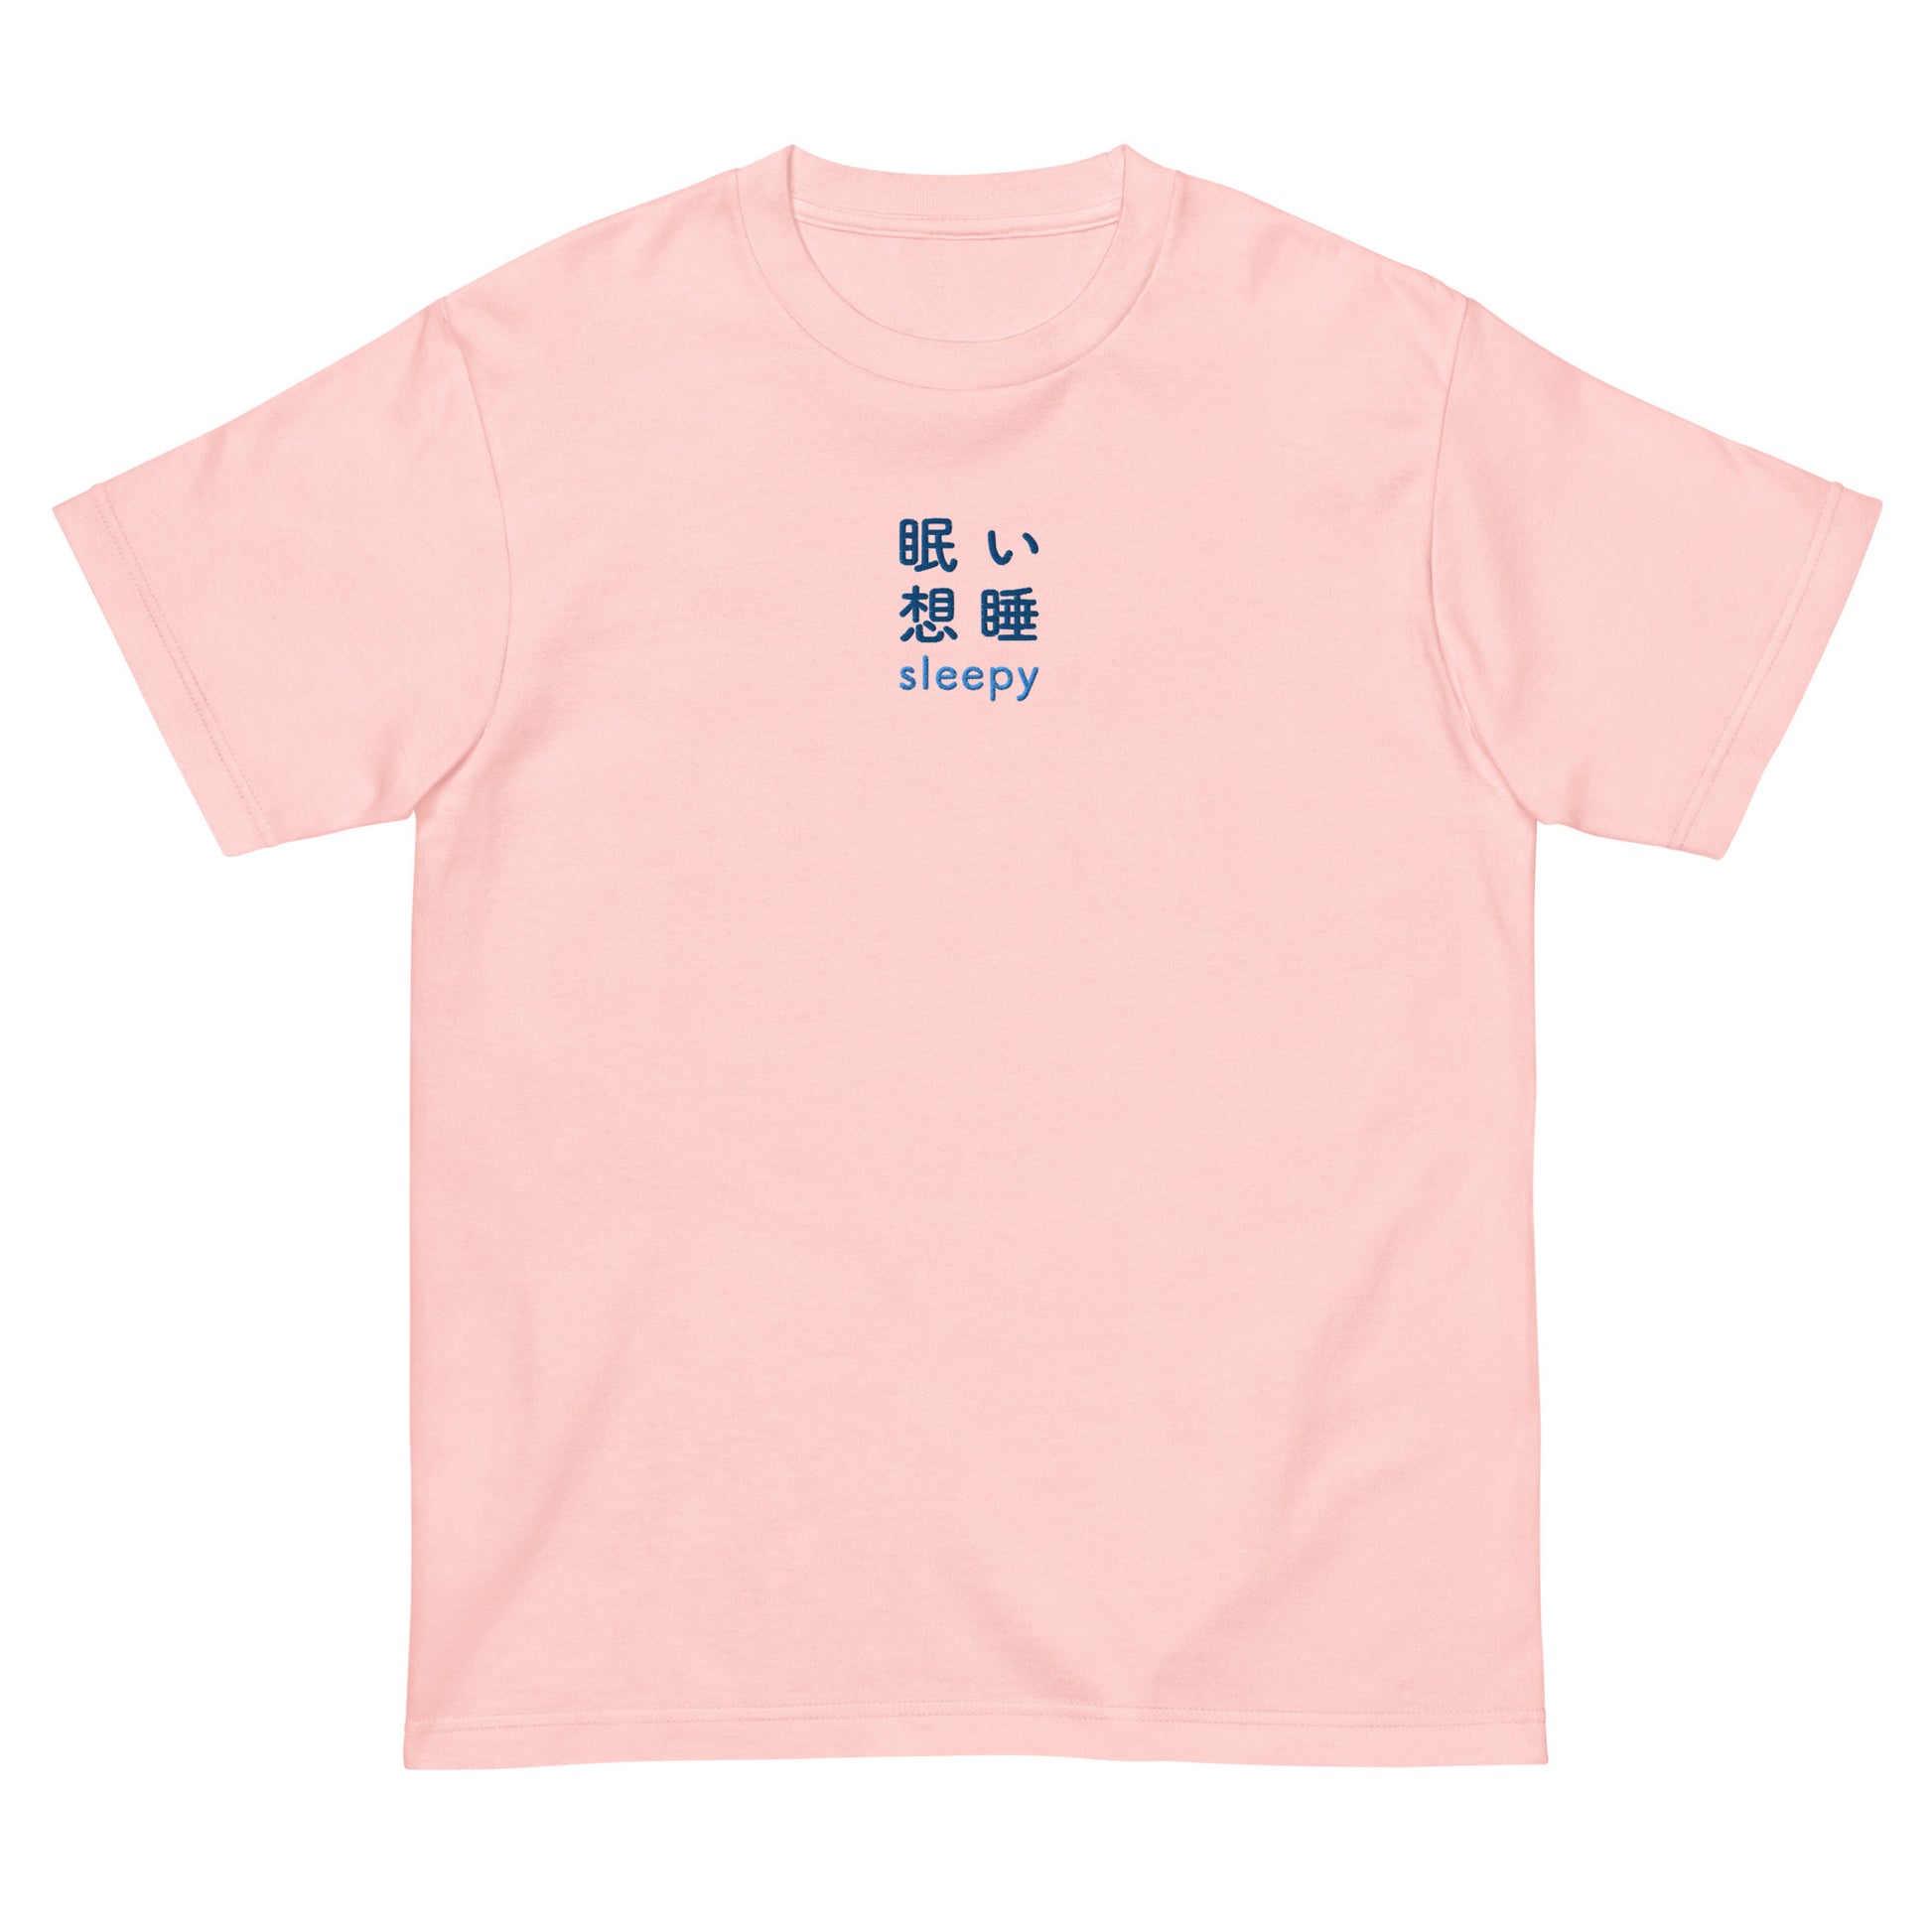 Pink High Quality Tee - Front Design with an Blue Embroidery "Sleepy" in Japanese,Chinese and English